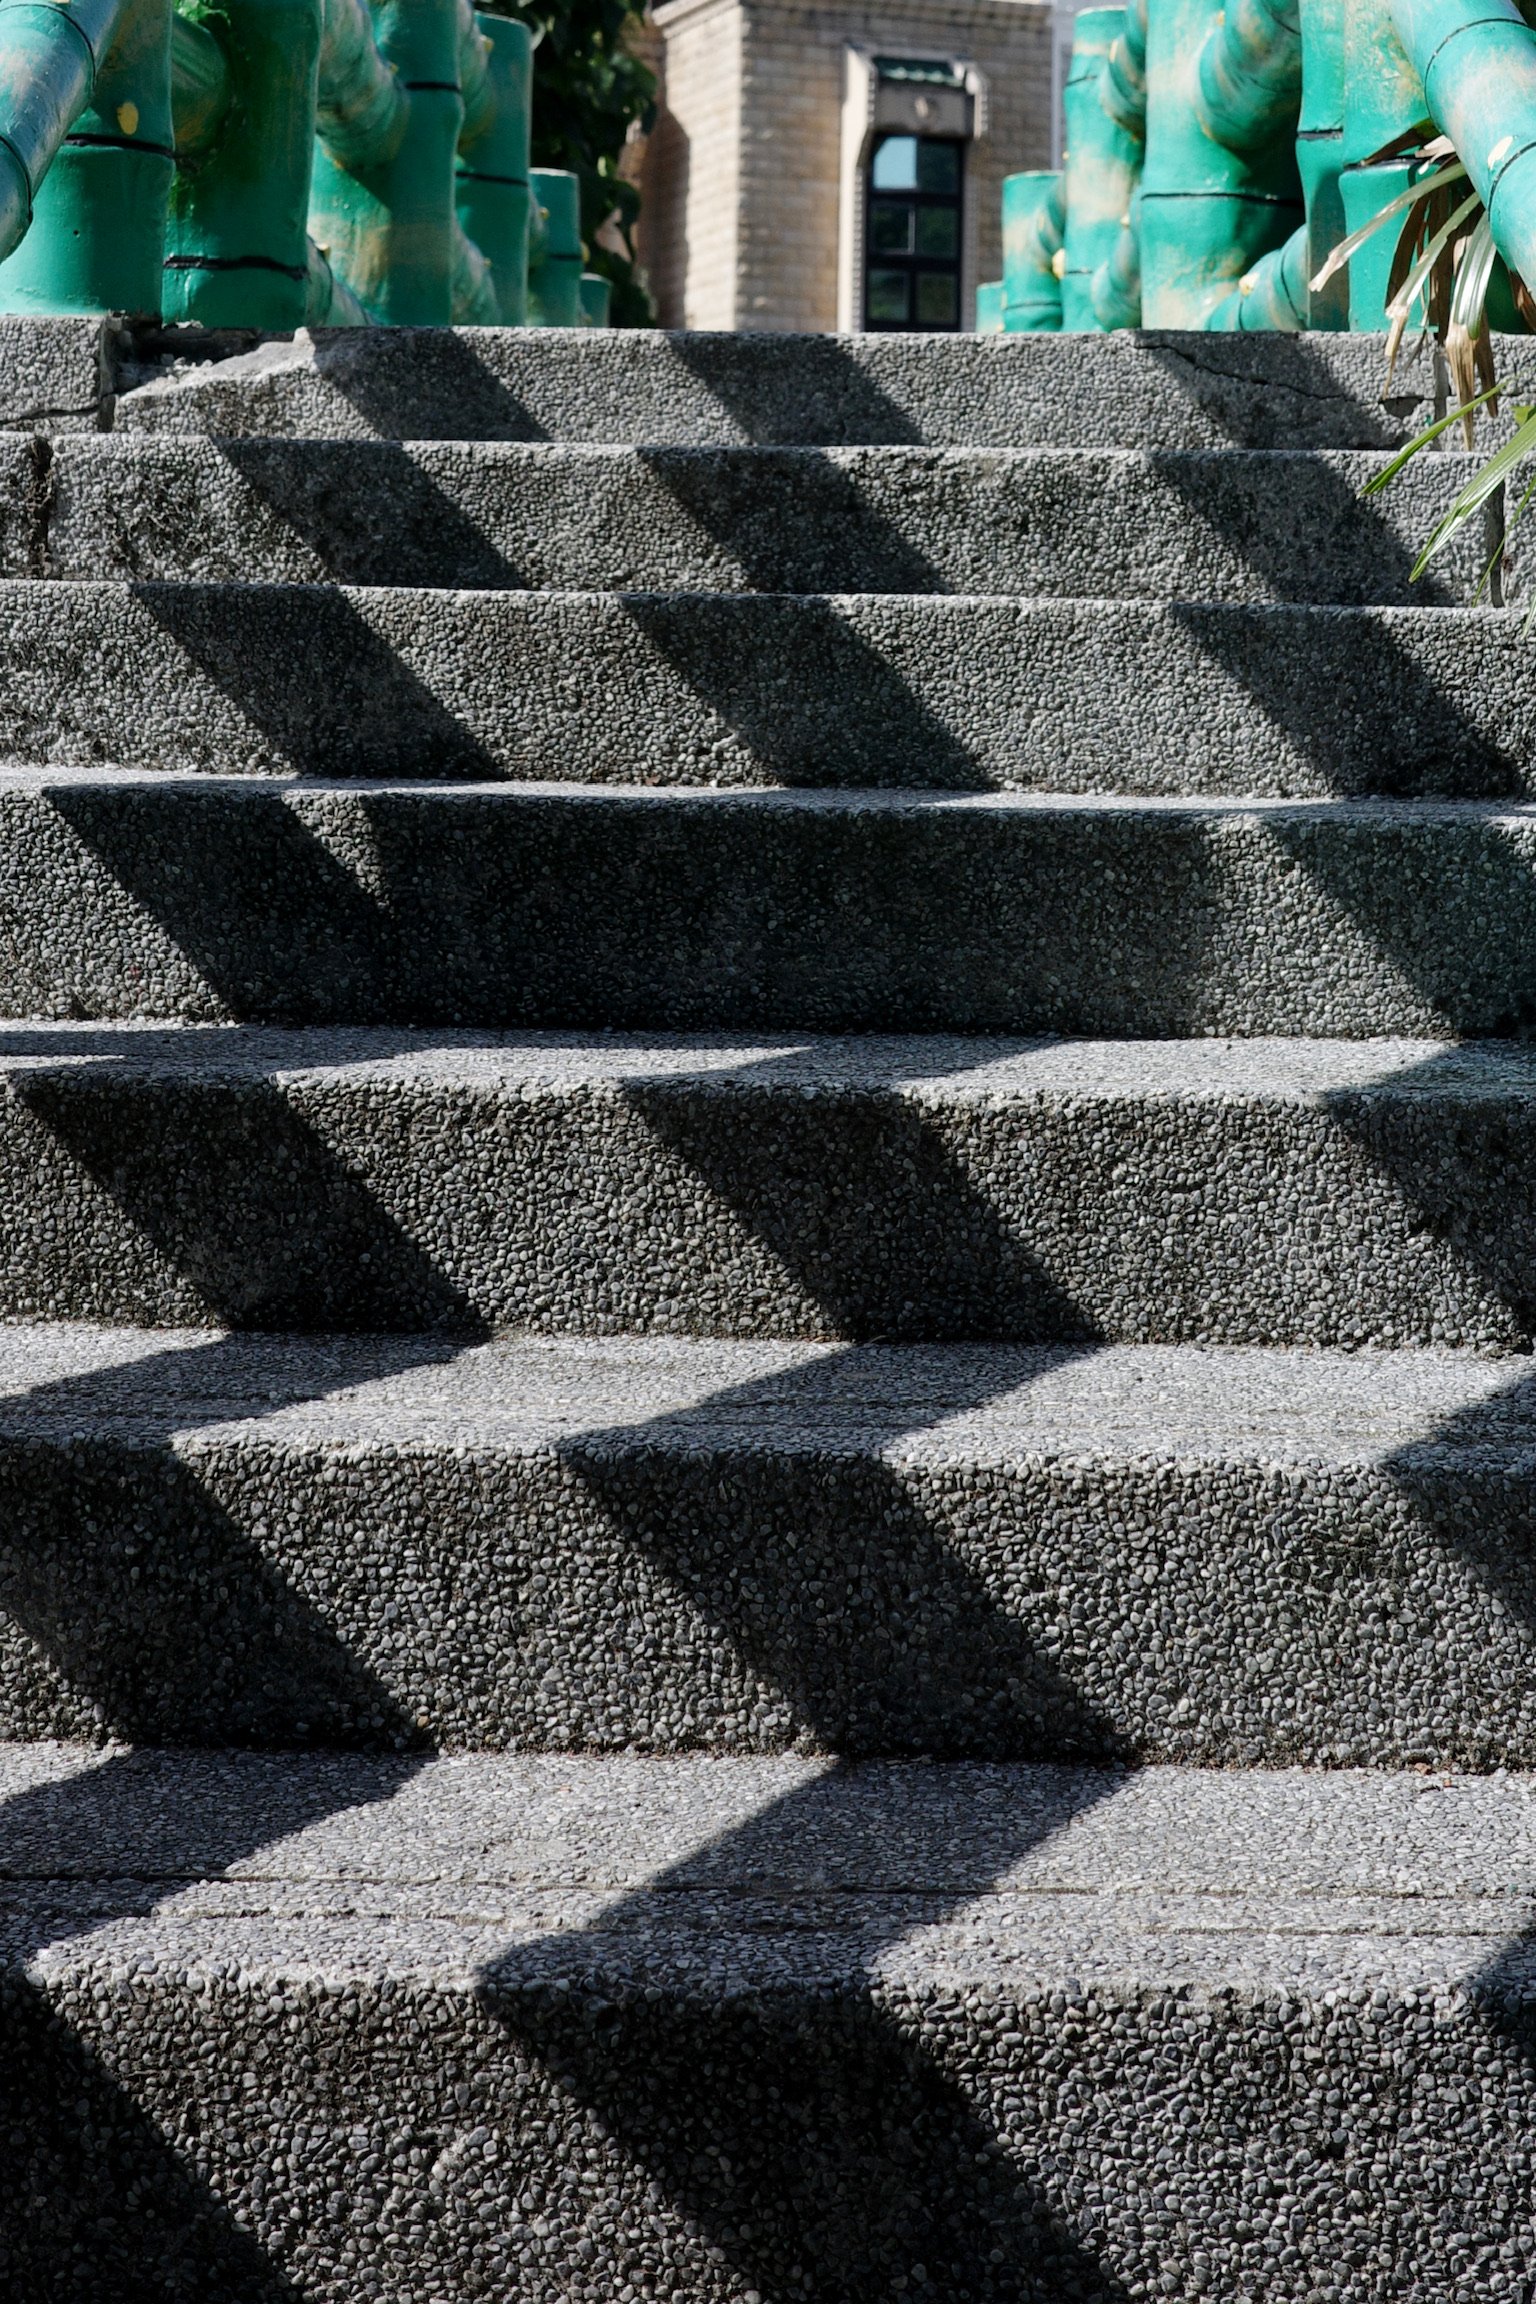 Zig zag shadows on steps of stairs.